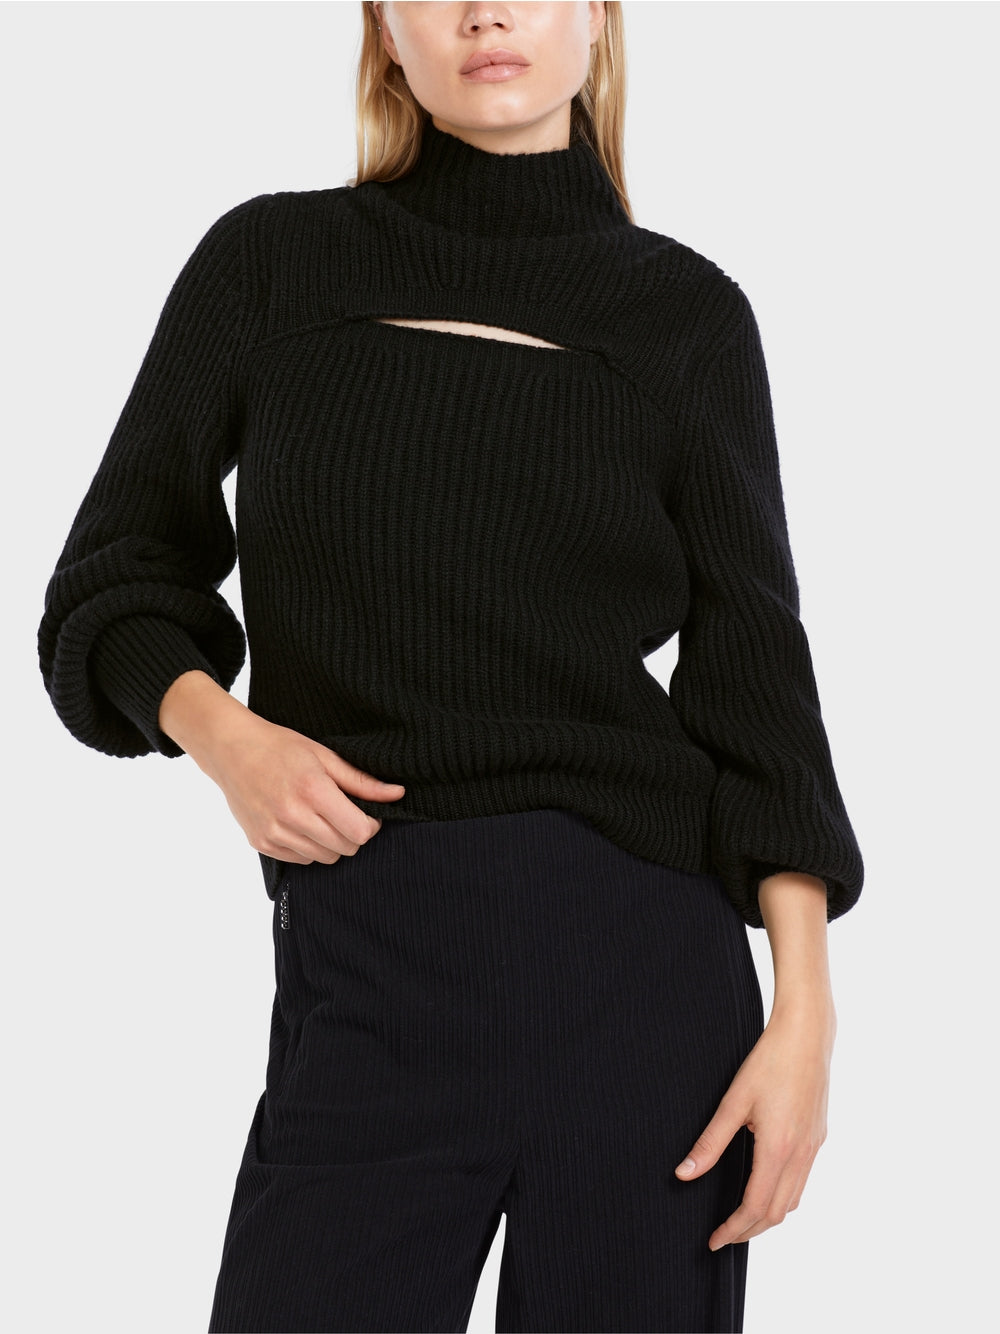 Marc Cain Black Cut Out Sweater Knitted in Germany